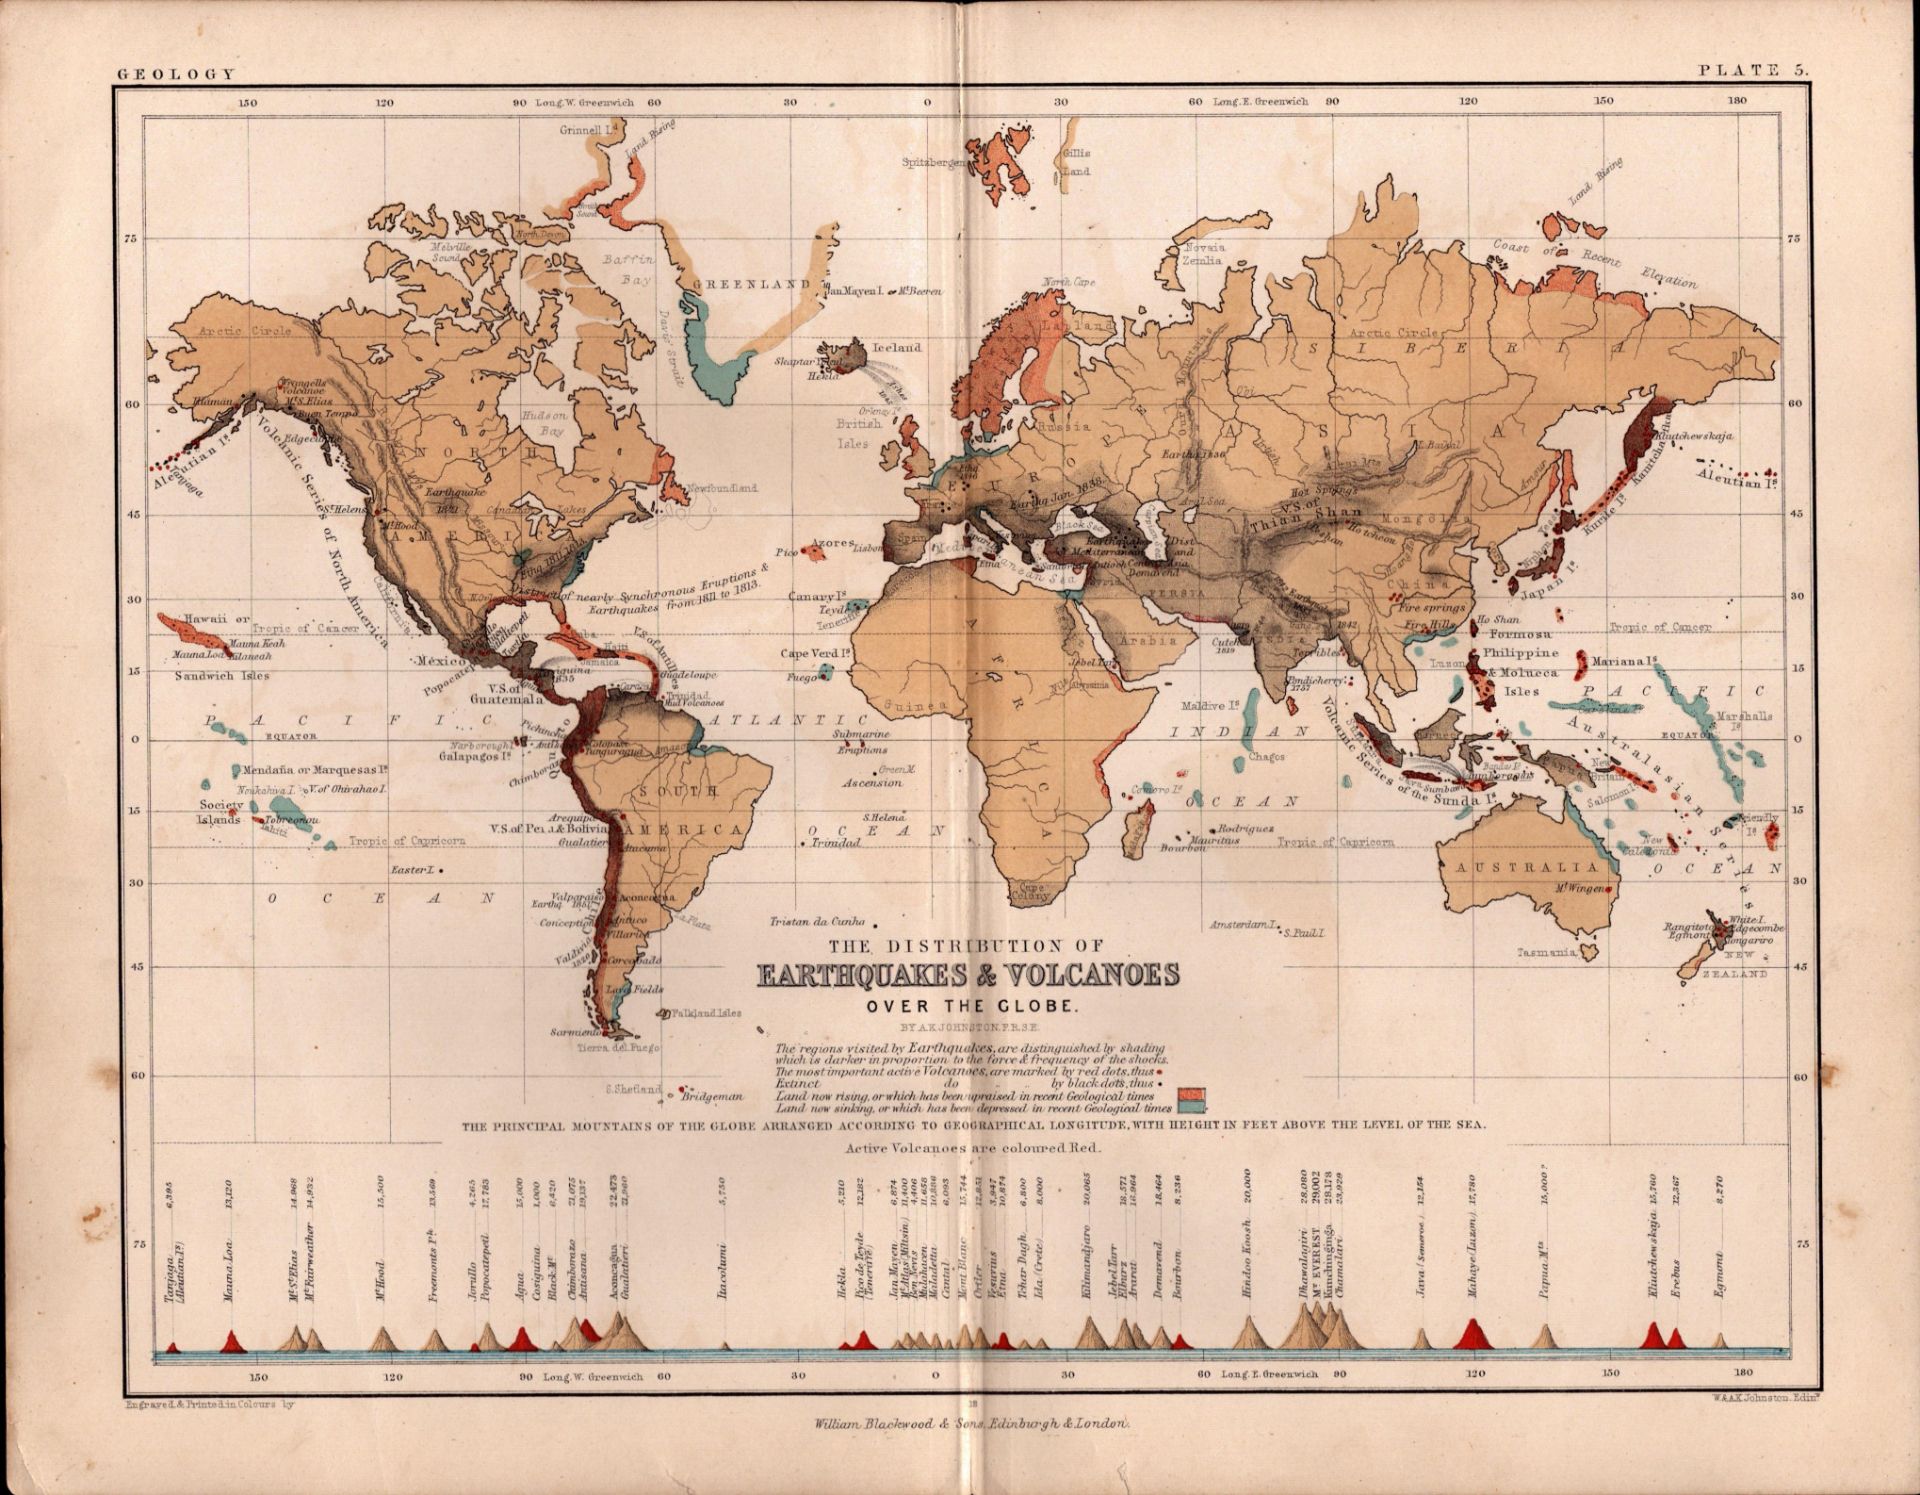 Worlds Earthquakes & Volcanoes 1871 WK Johnston Antique Map.